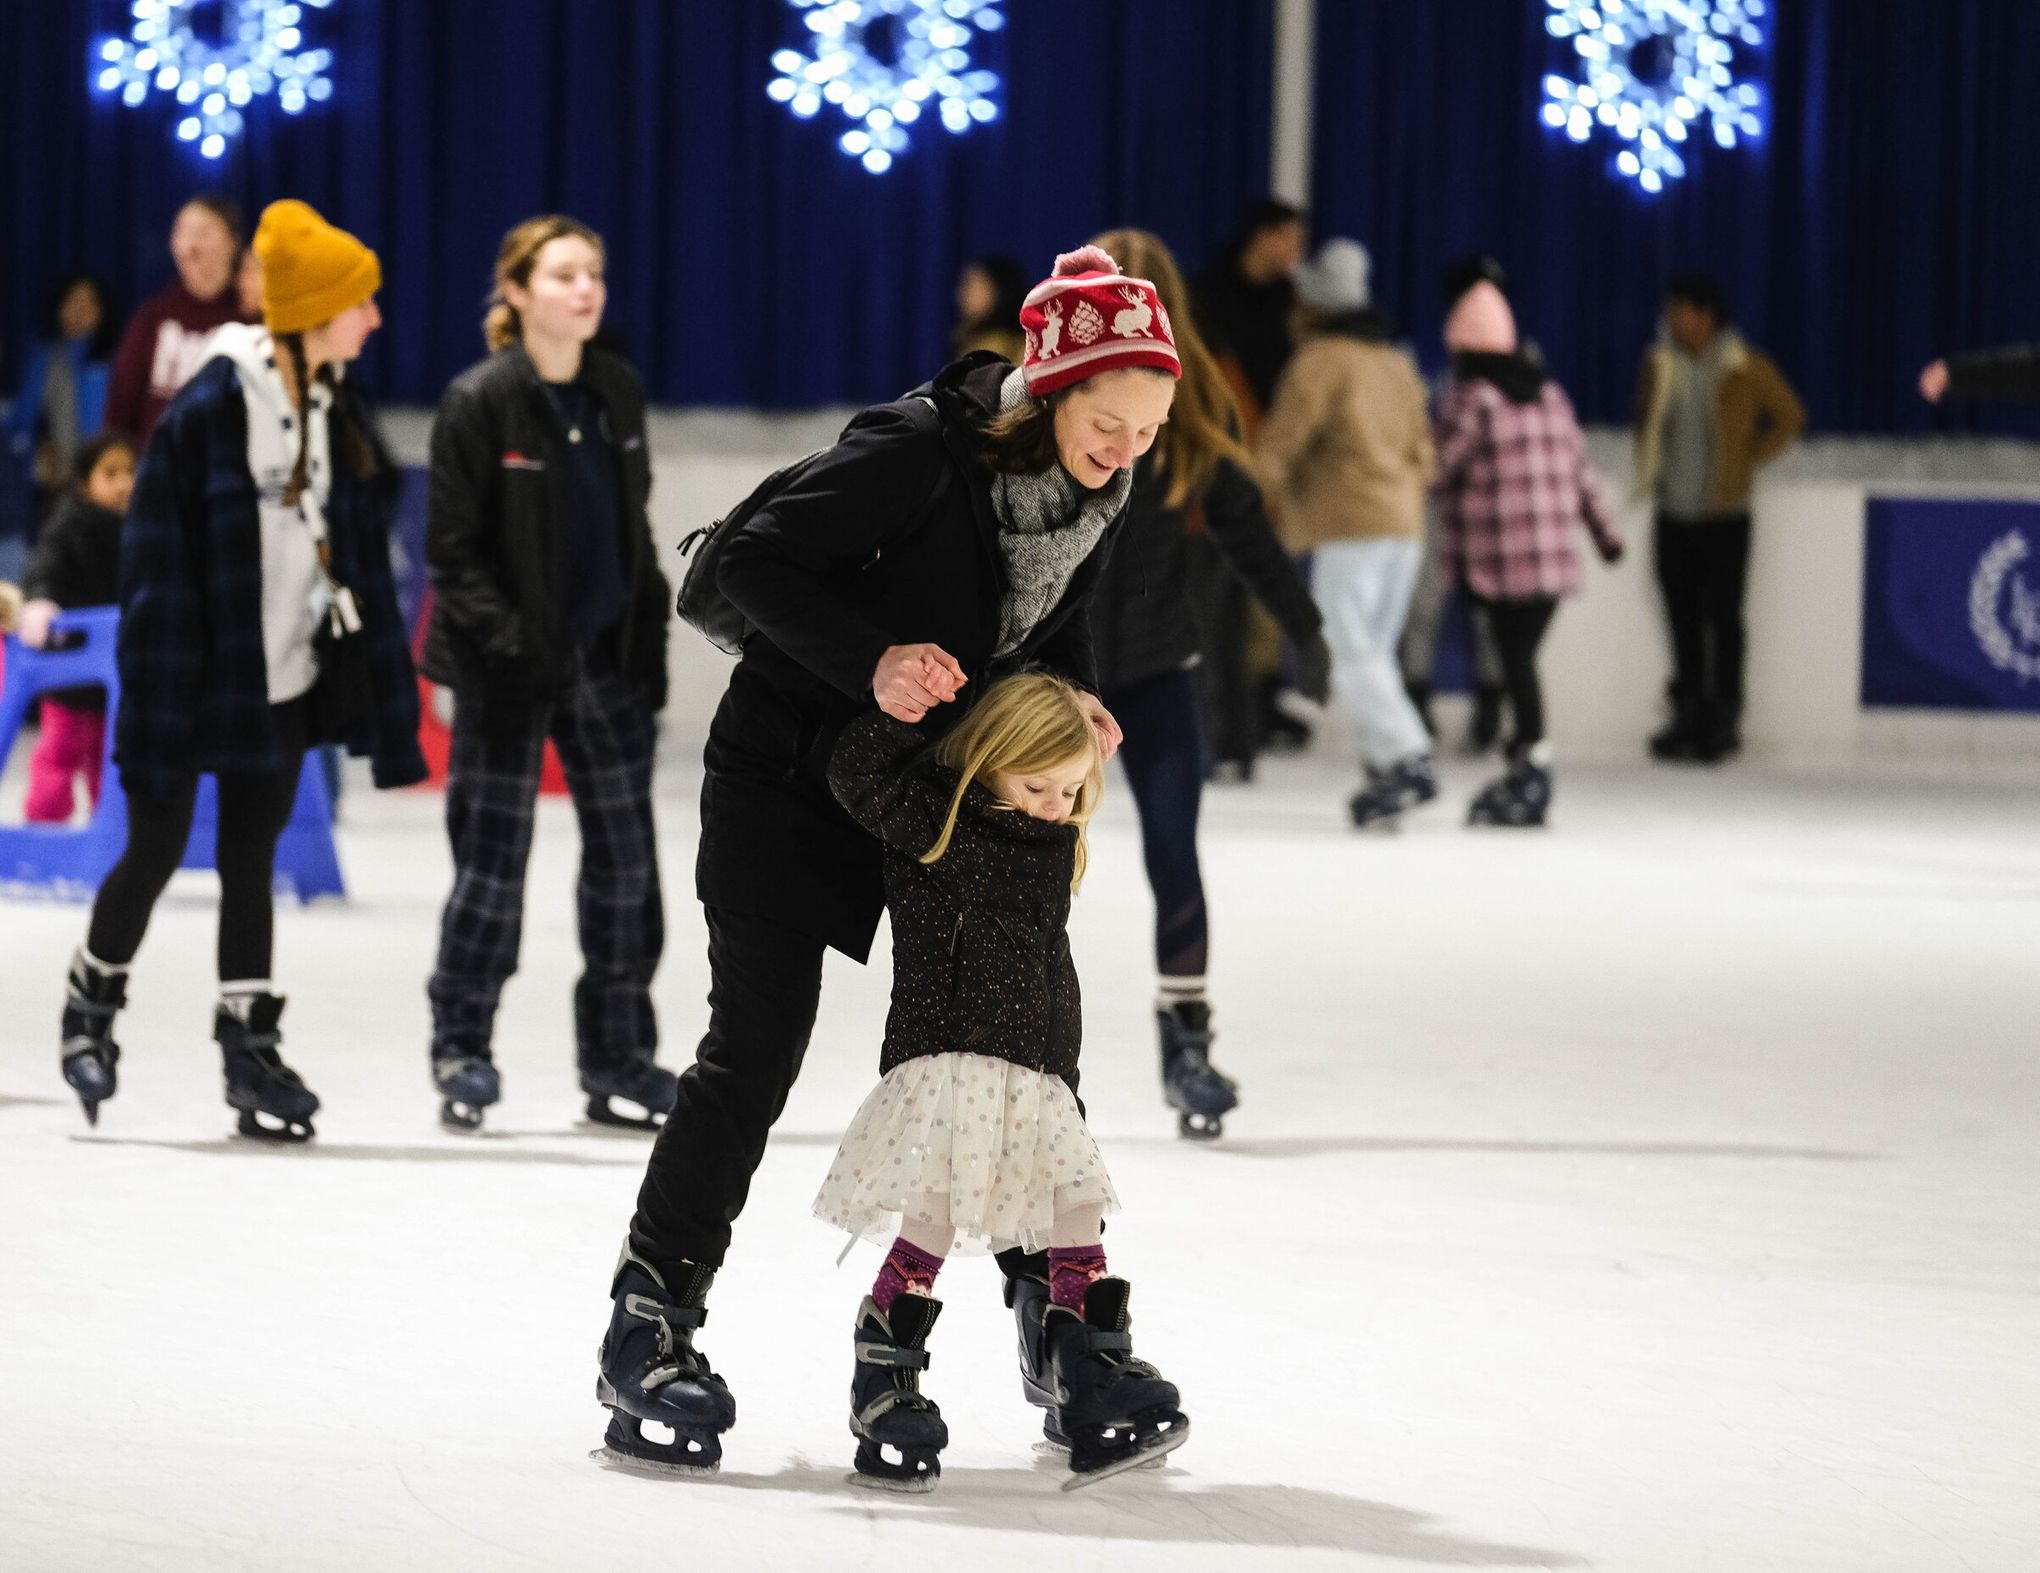 It's ice skating season in Seattle. Sharpen your skills with this refresher